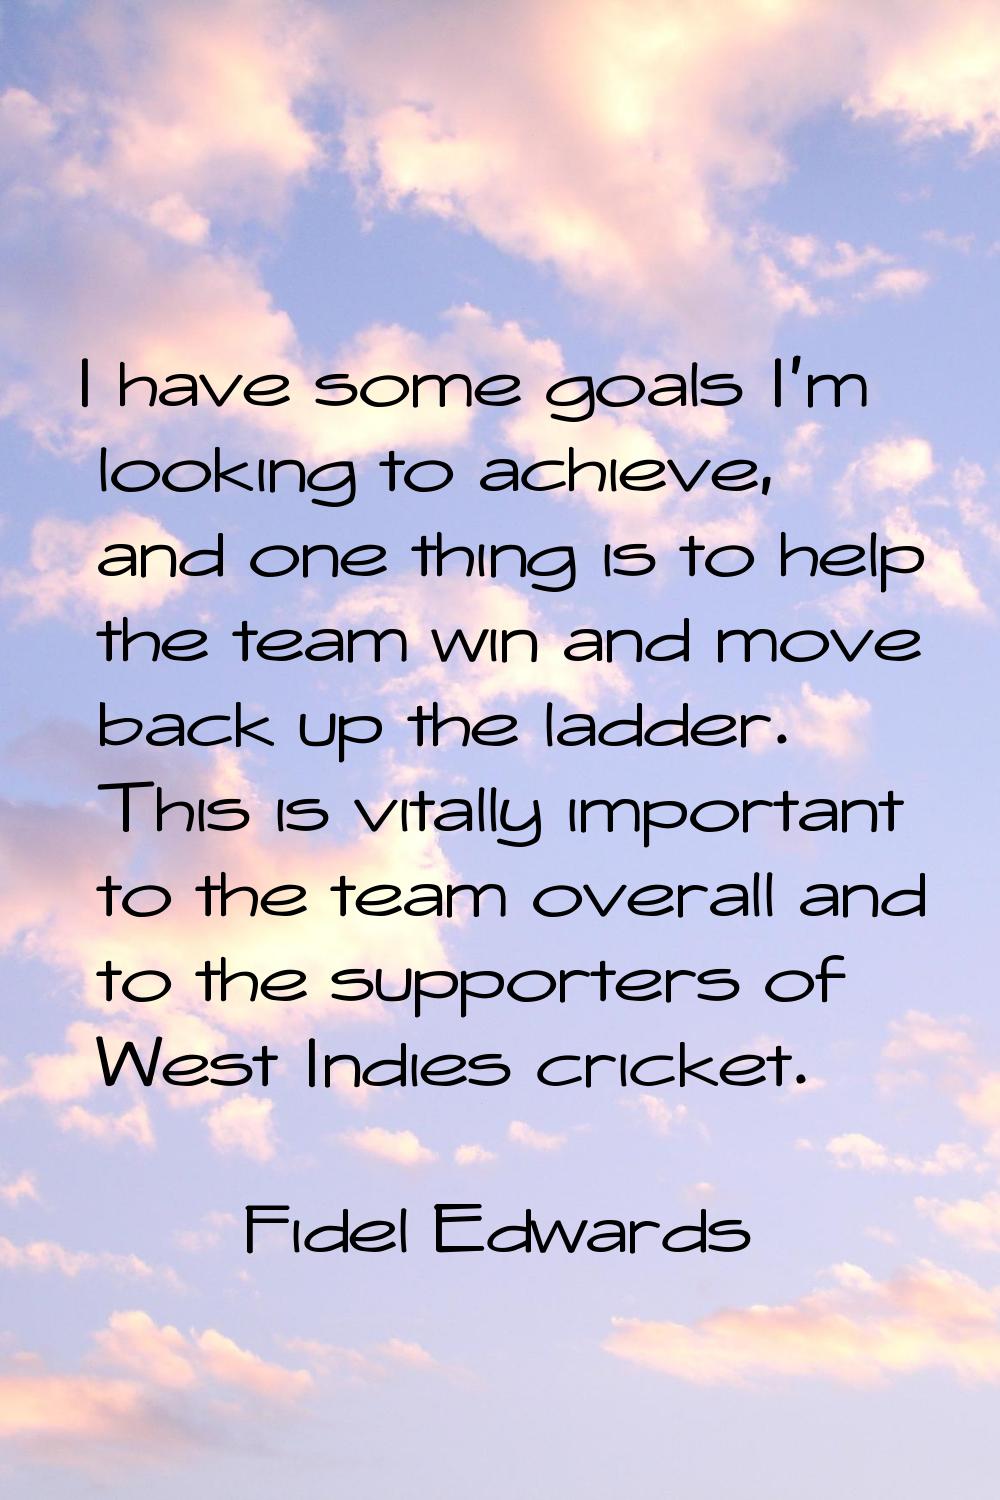 I have some goals I'm looking to achieve, and one thing is to help the team win and move back up th